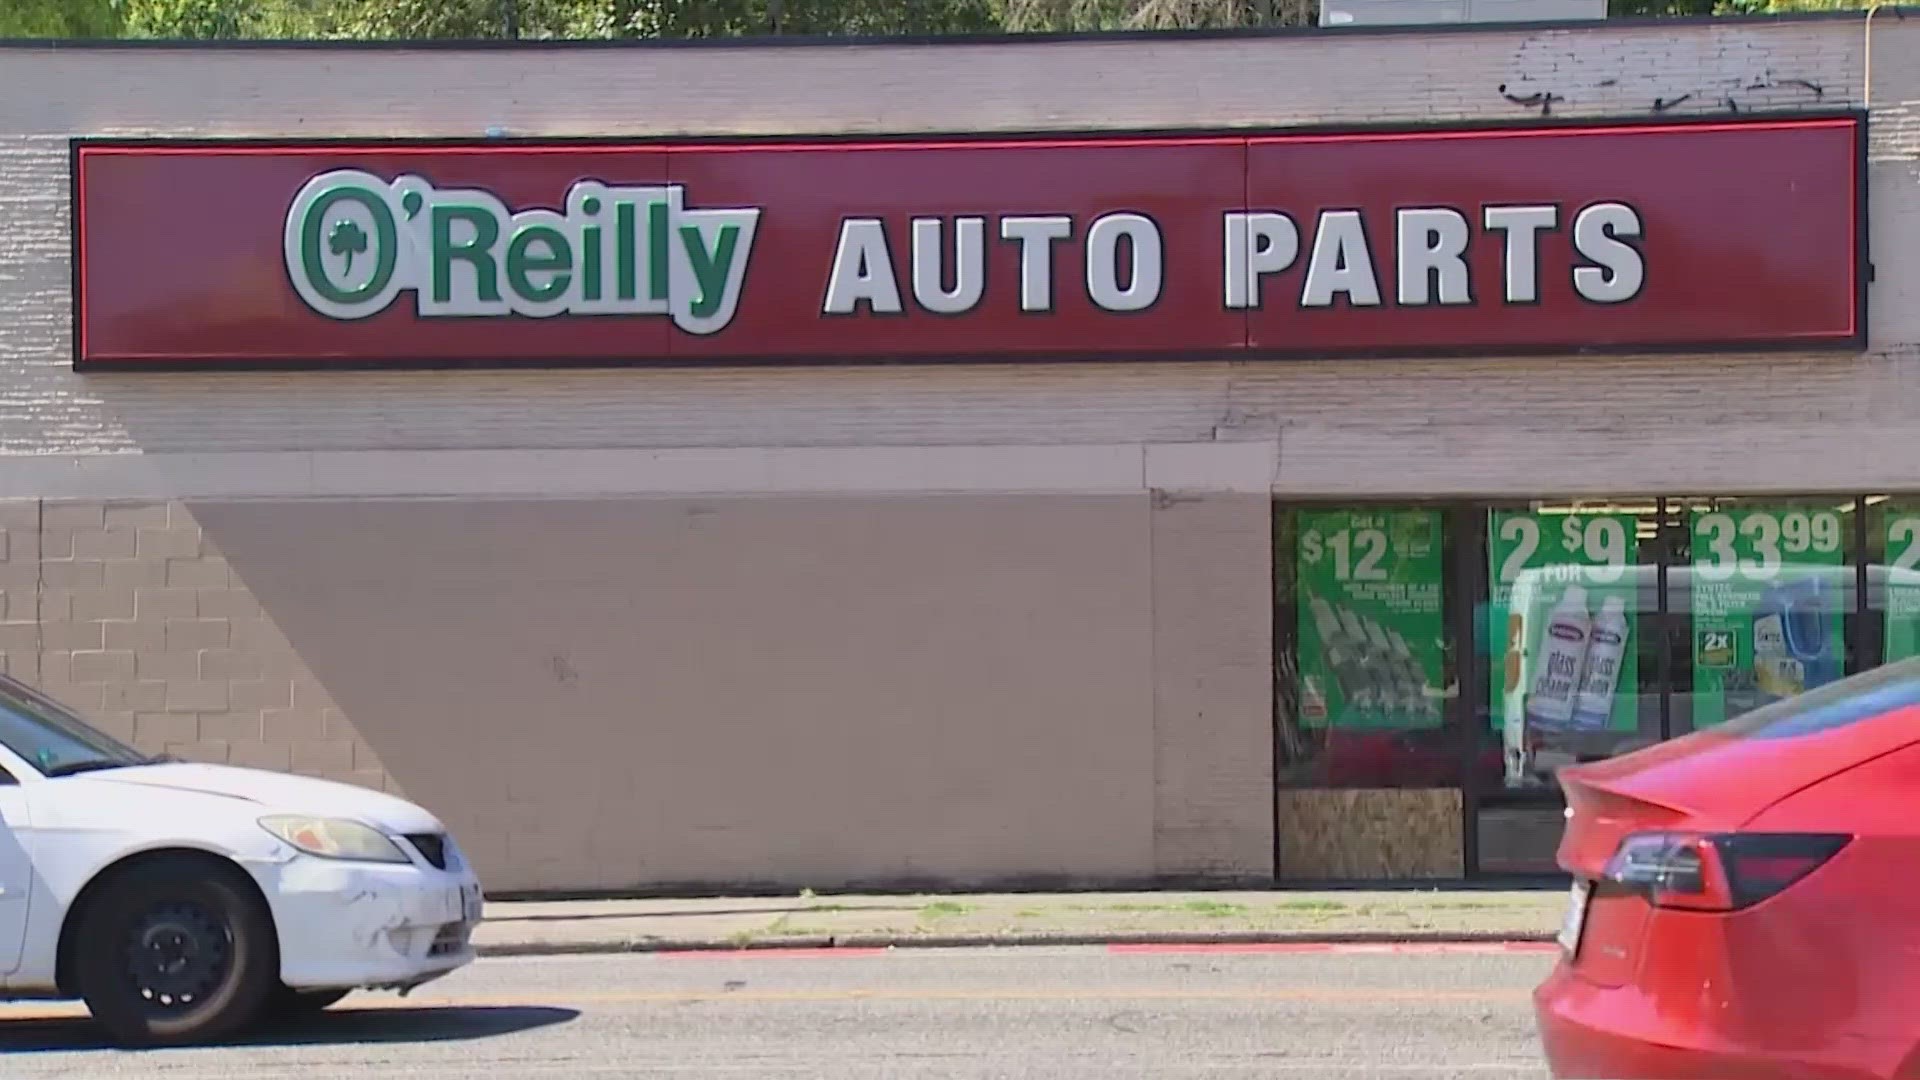 O’Reilly Auto Parts managers are accused of denying pregnant women the ability to rest, pump breastmilk for their newborn babies and forcing them out of their jobs.